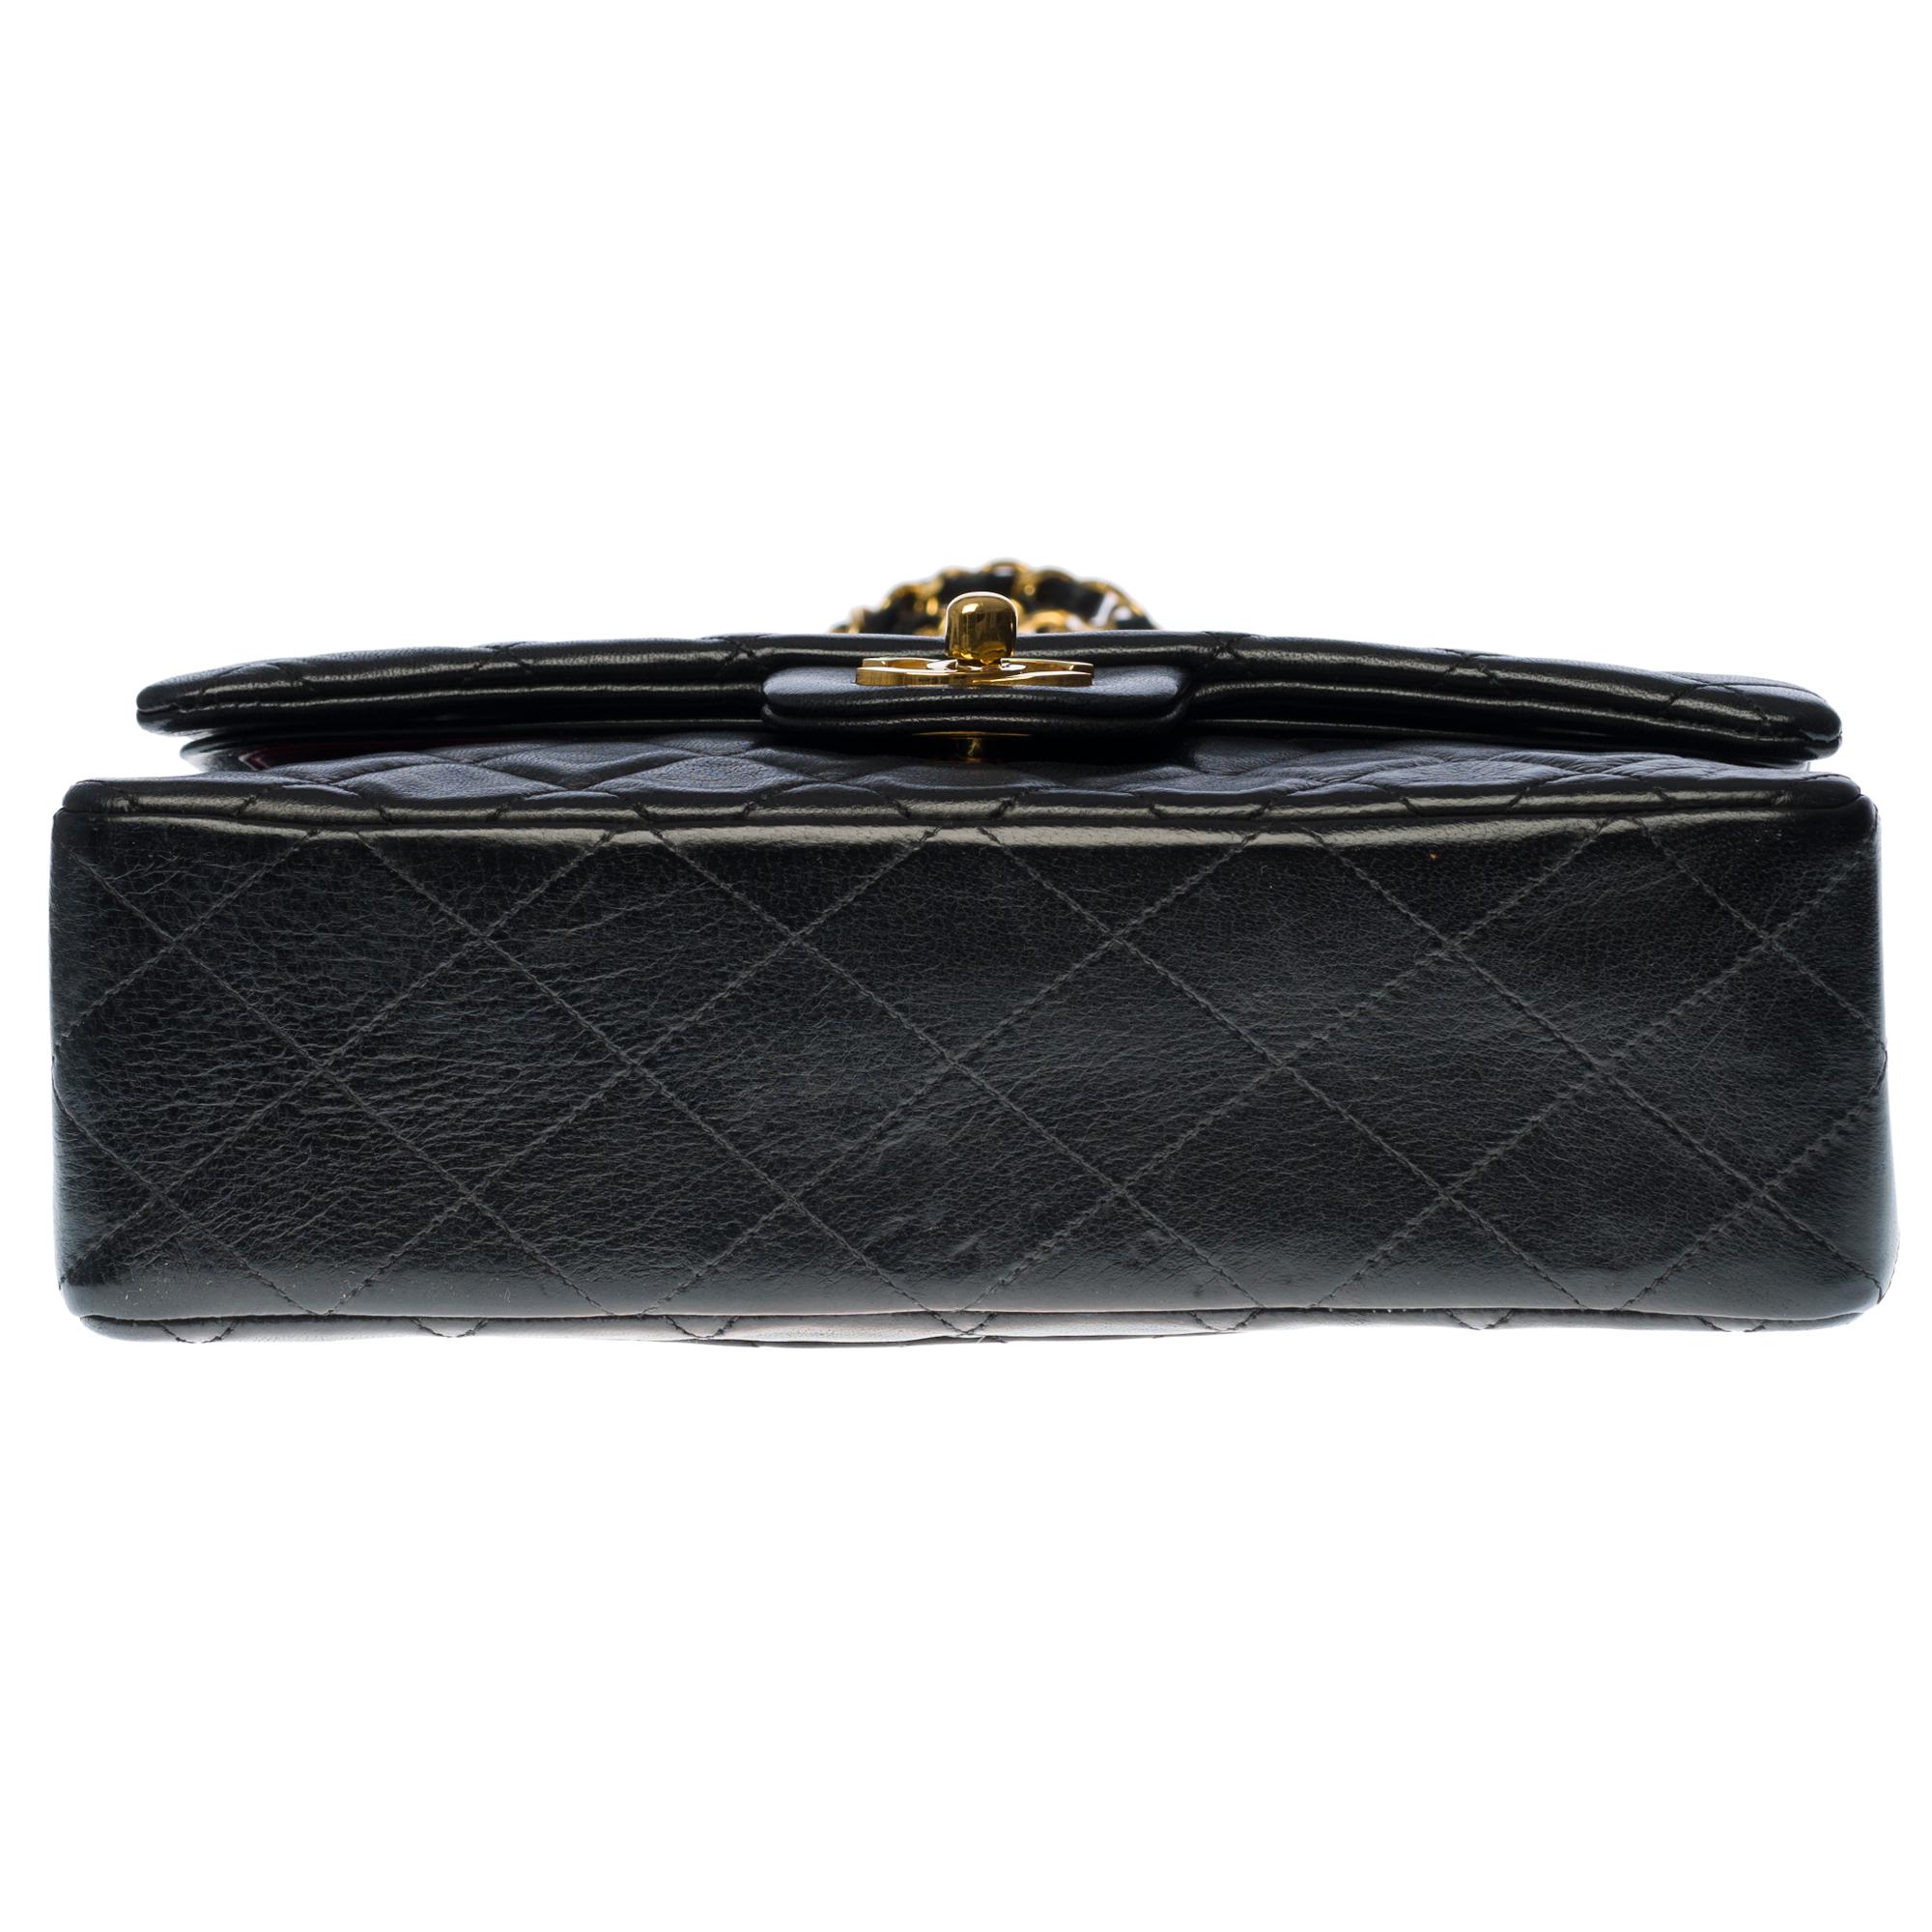 The Coveted Chanel Timeless 23cm Shoulder bag in black quilted lambskin, GHW 3